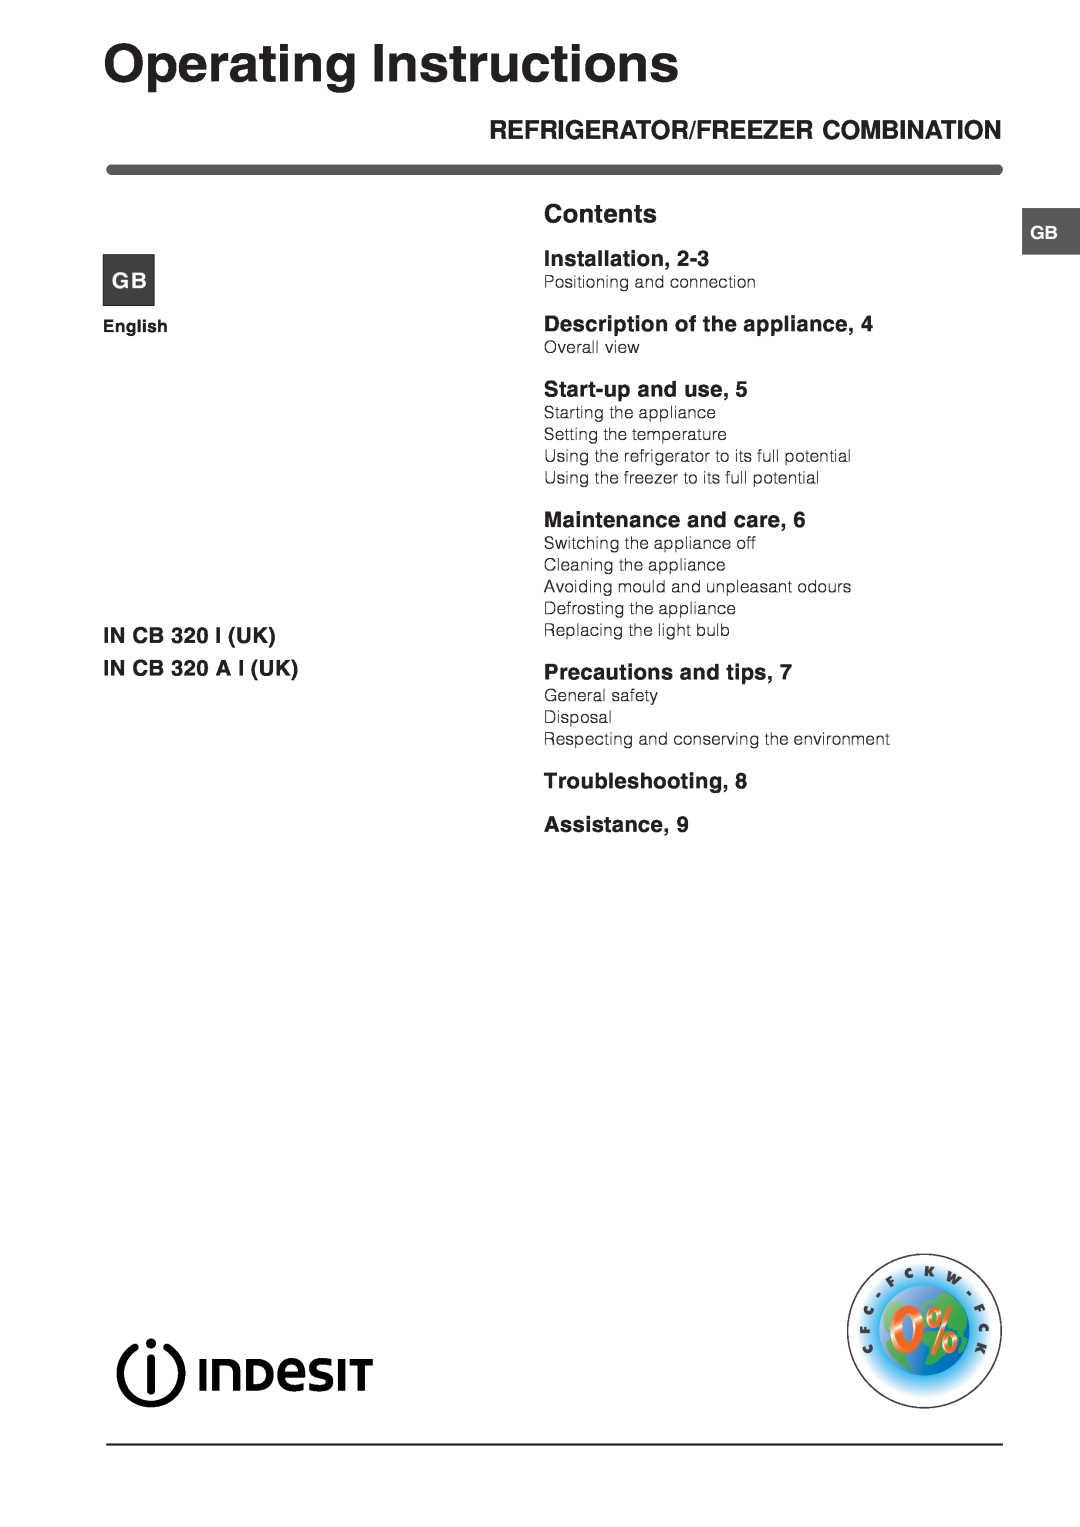 Indesit IN CB 320 A I manual Operating Instructions, Installation, Description of the appliance, Start-up and use, English 